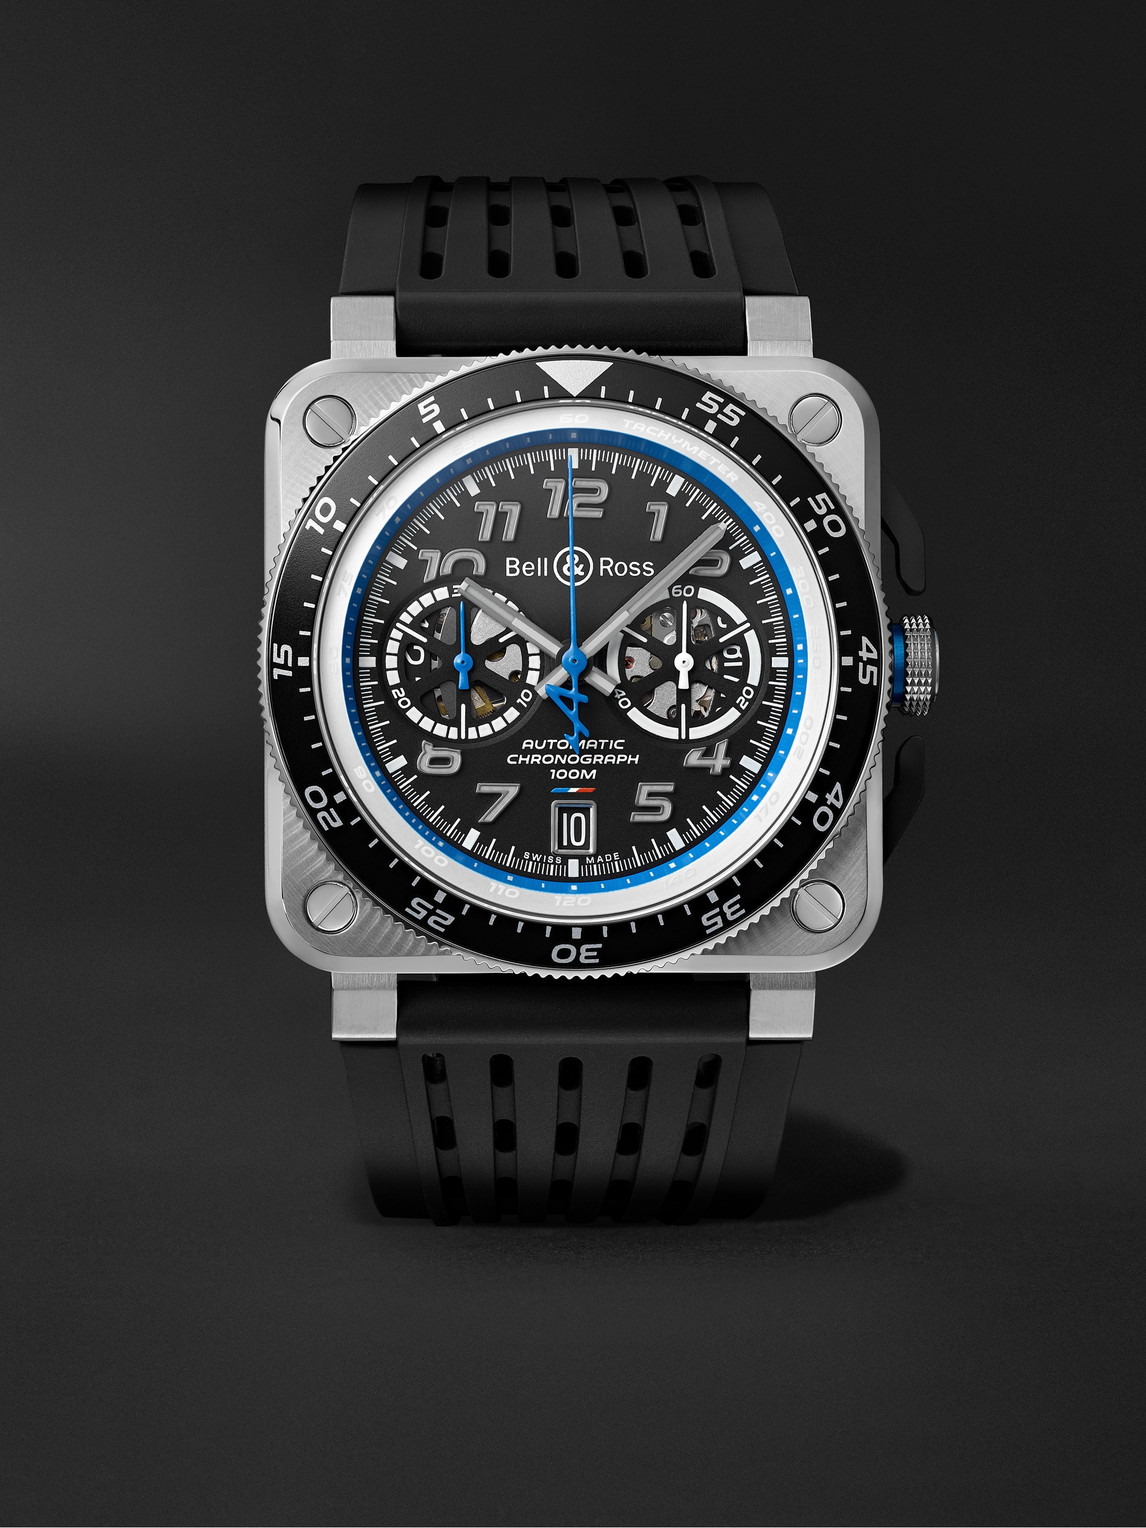 Bell & Ross Alpine F1 Team Br 03-94 Limited Edition Automatic Chronograph 42mm Stainless Steel And Rubber Watch, In Black